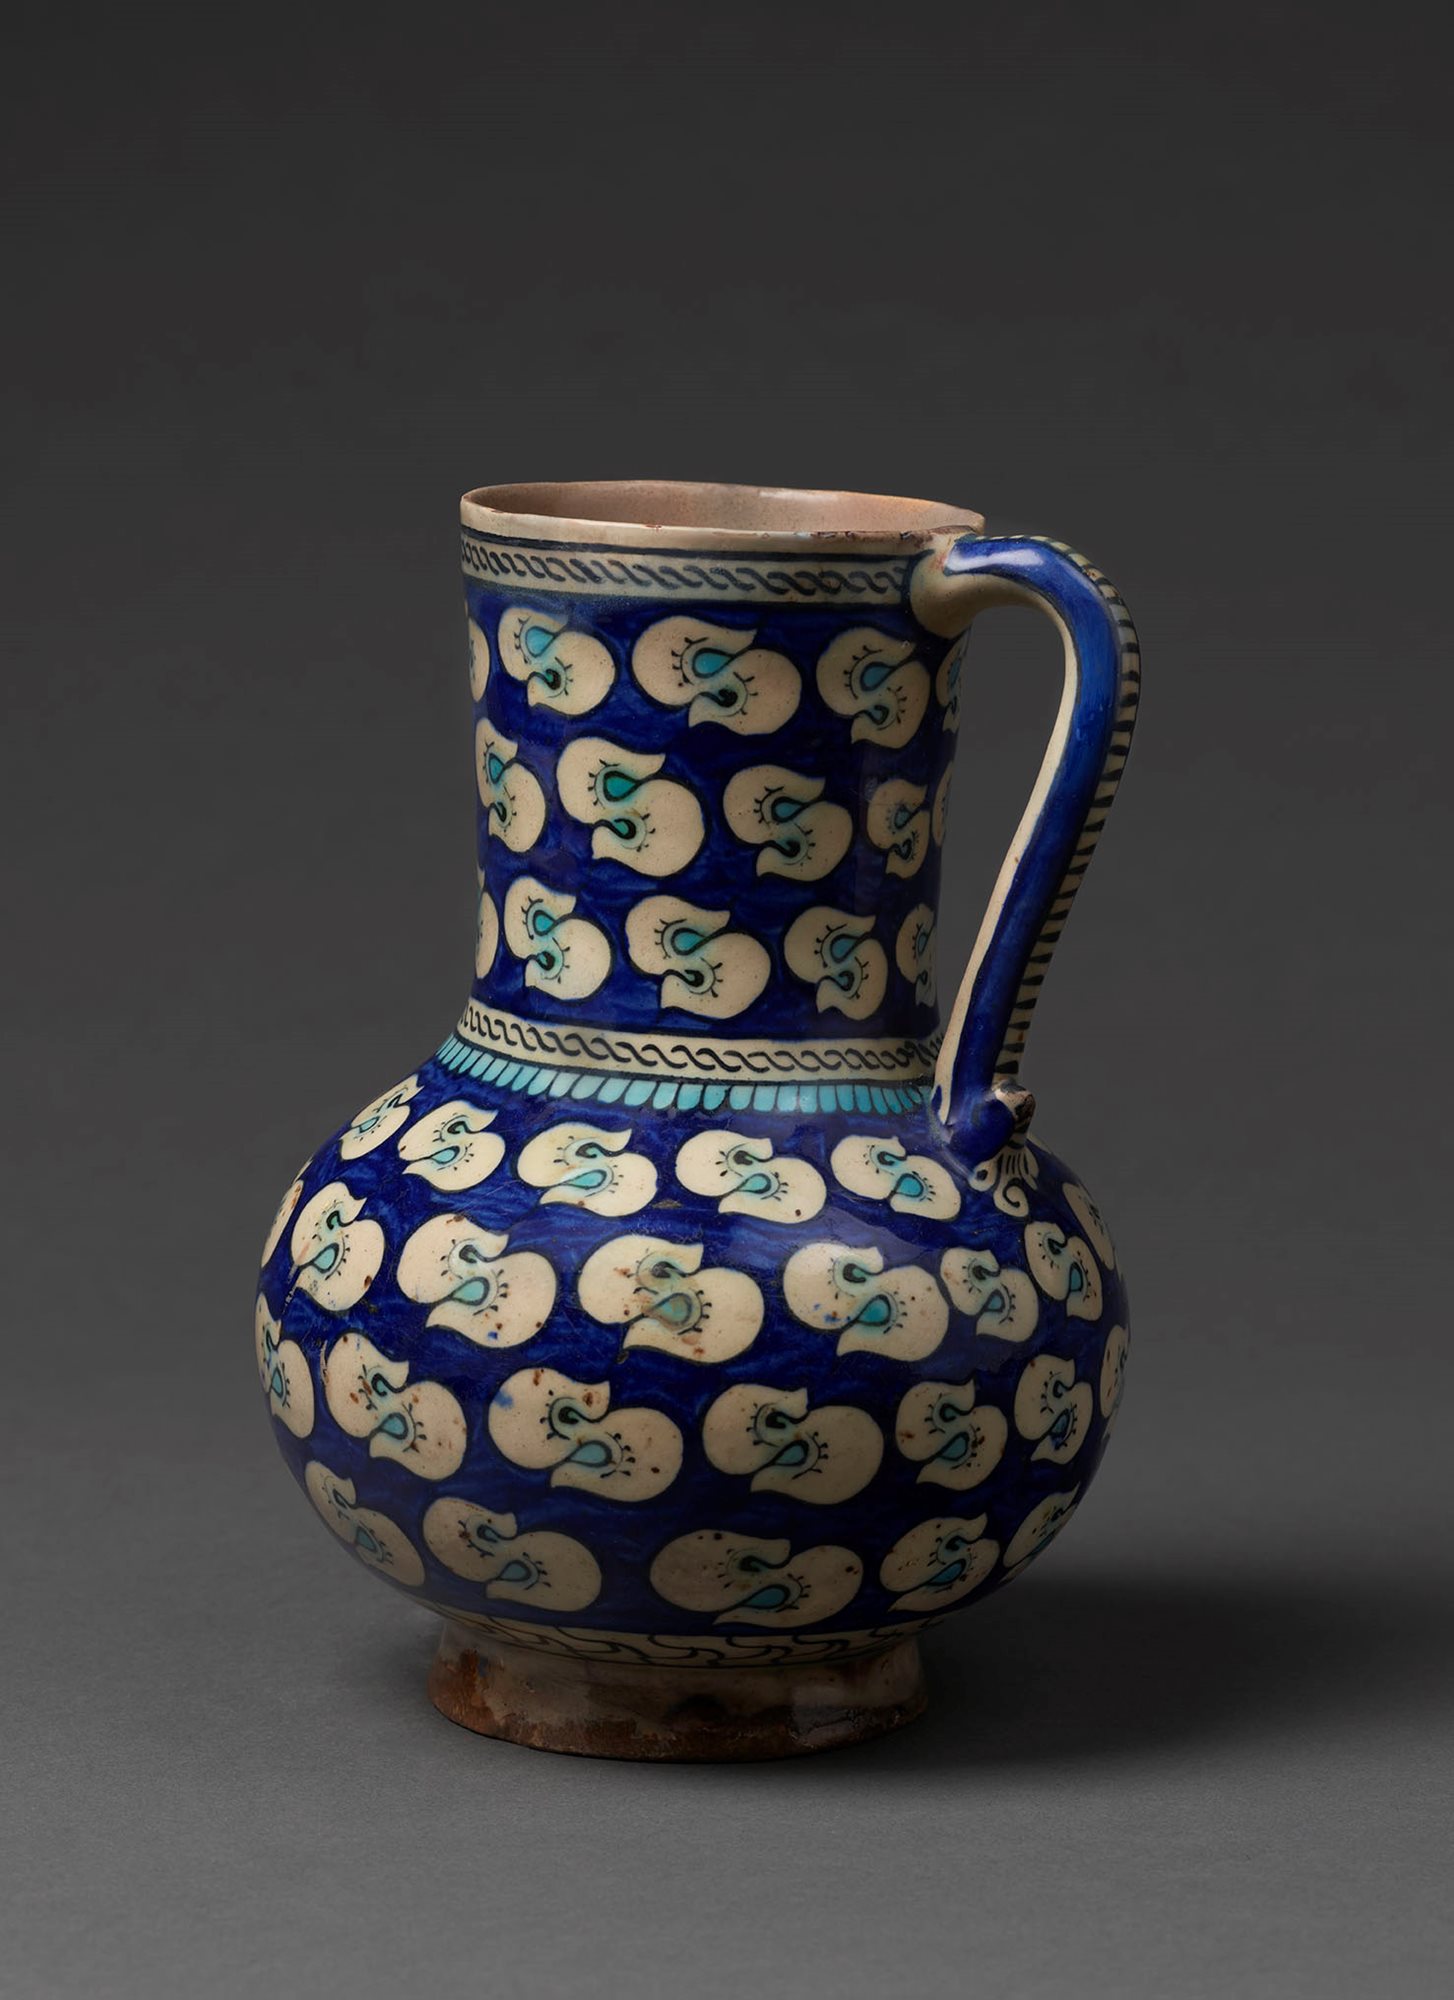 Jug decorated with Chinese Clouds